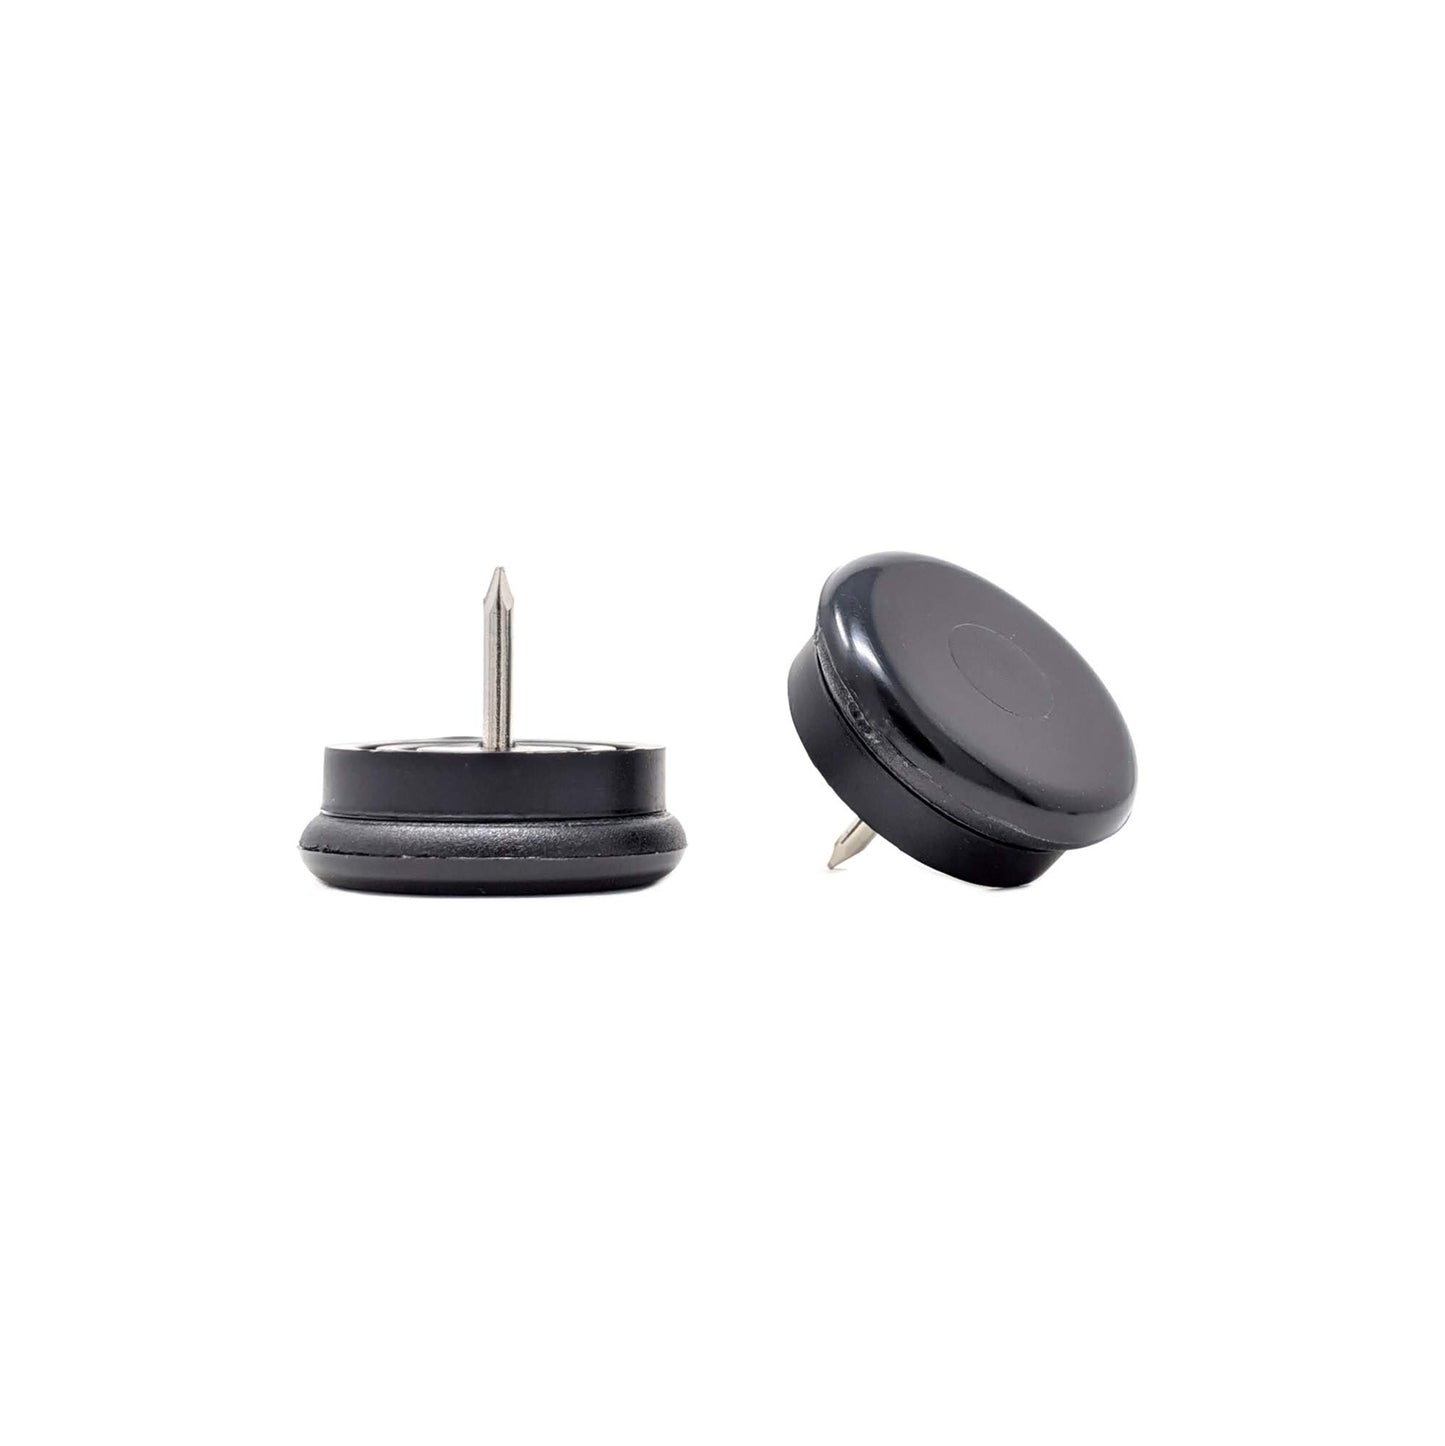 Nail-On Furniture Glides 30mm Black Nylon Base - Made in Germany